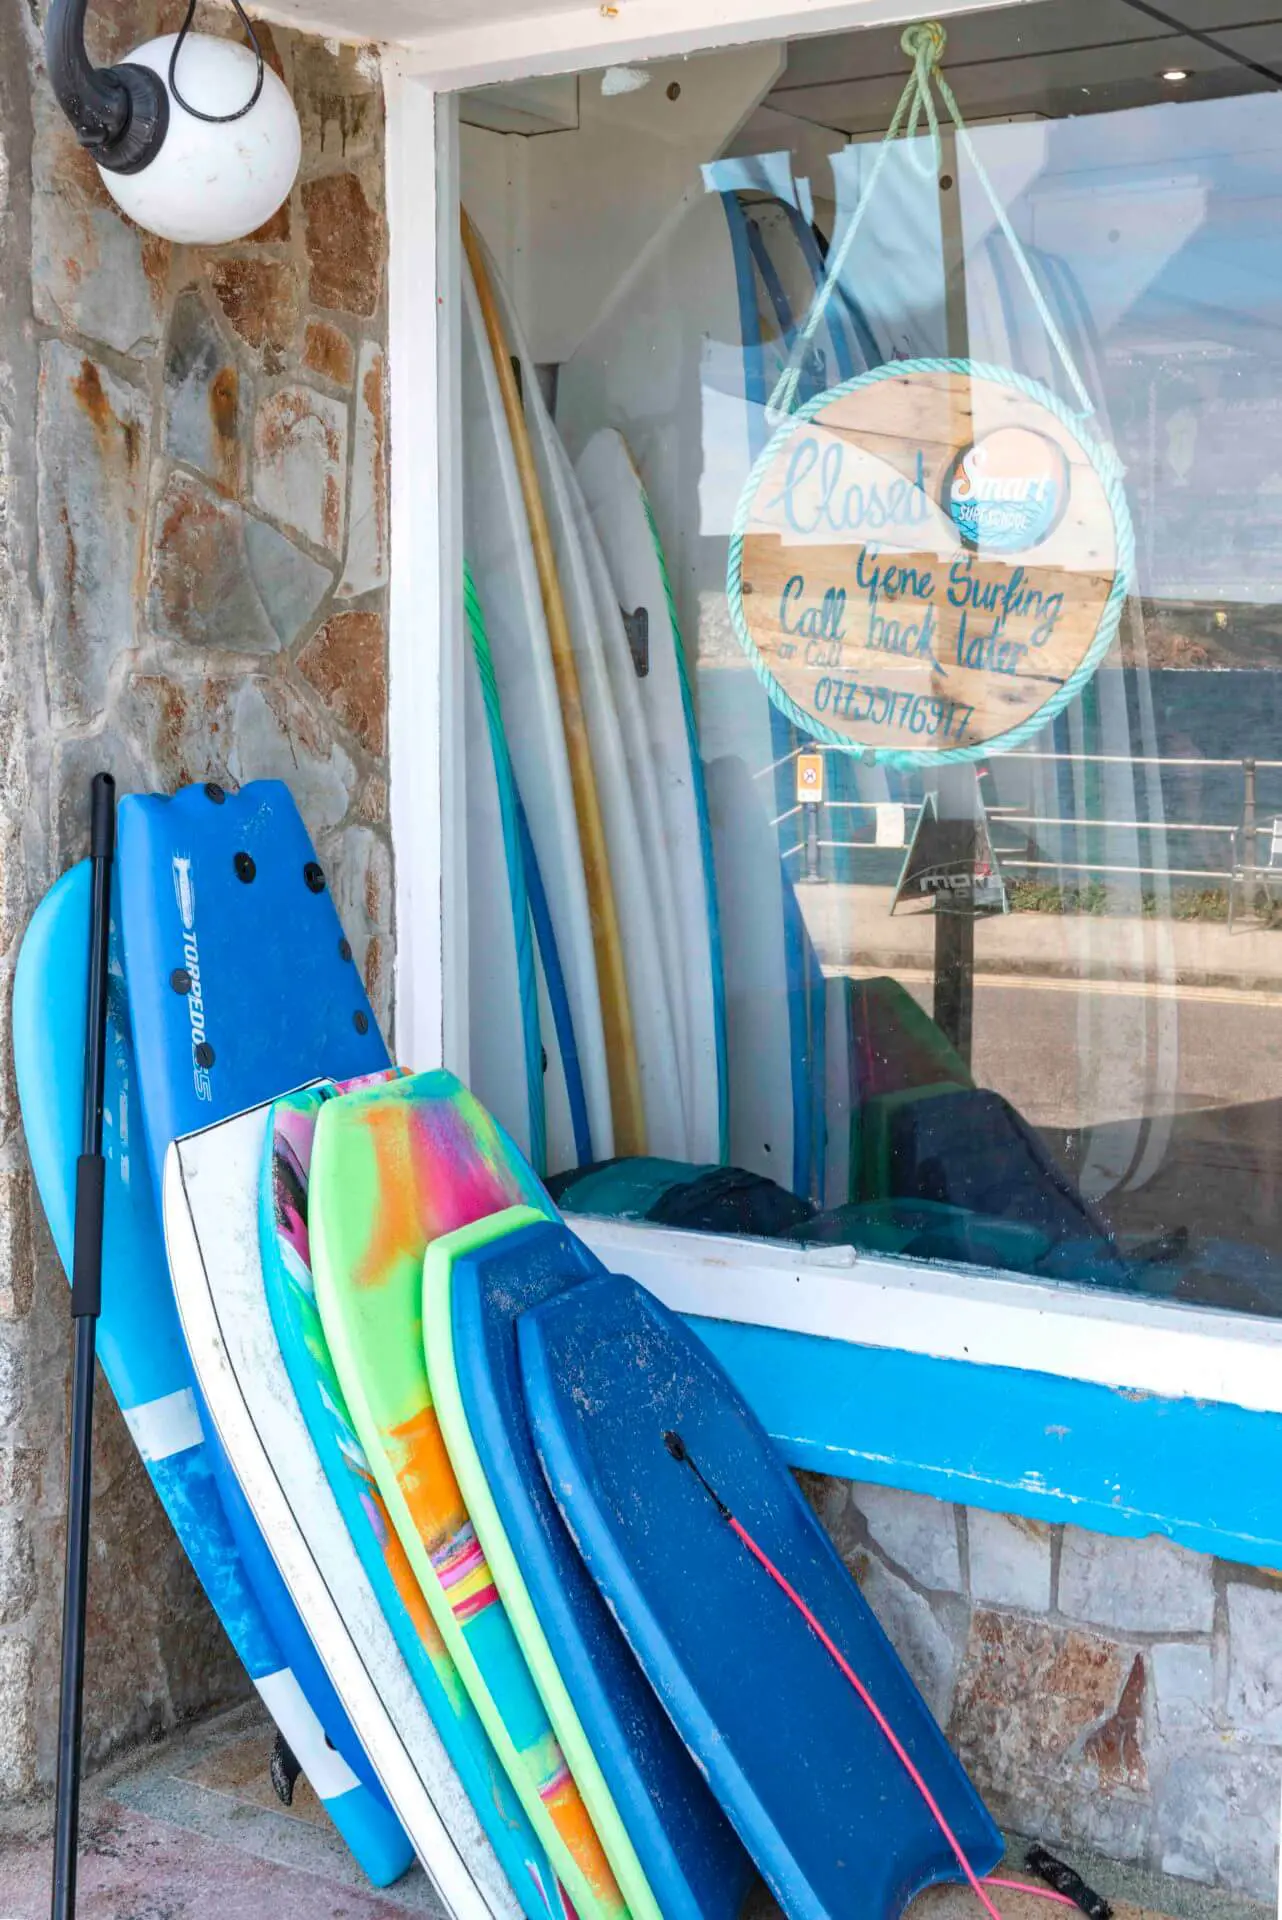 Surf Shop in The Popular Tourist Destination of Cornwall